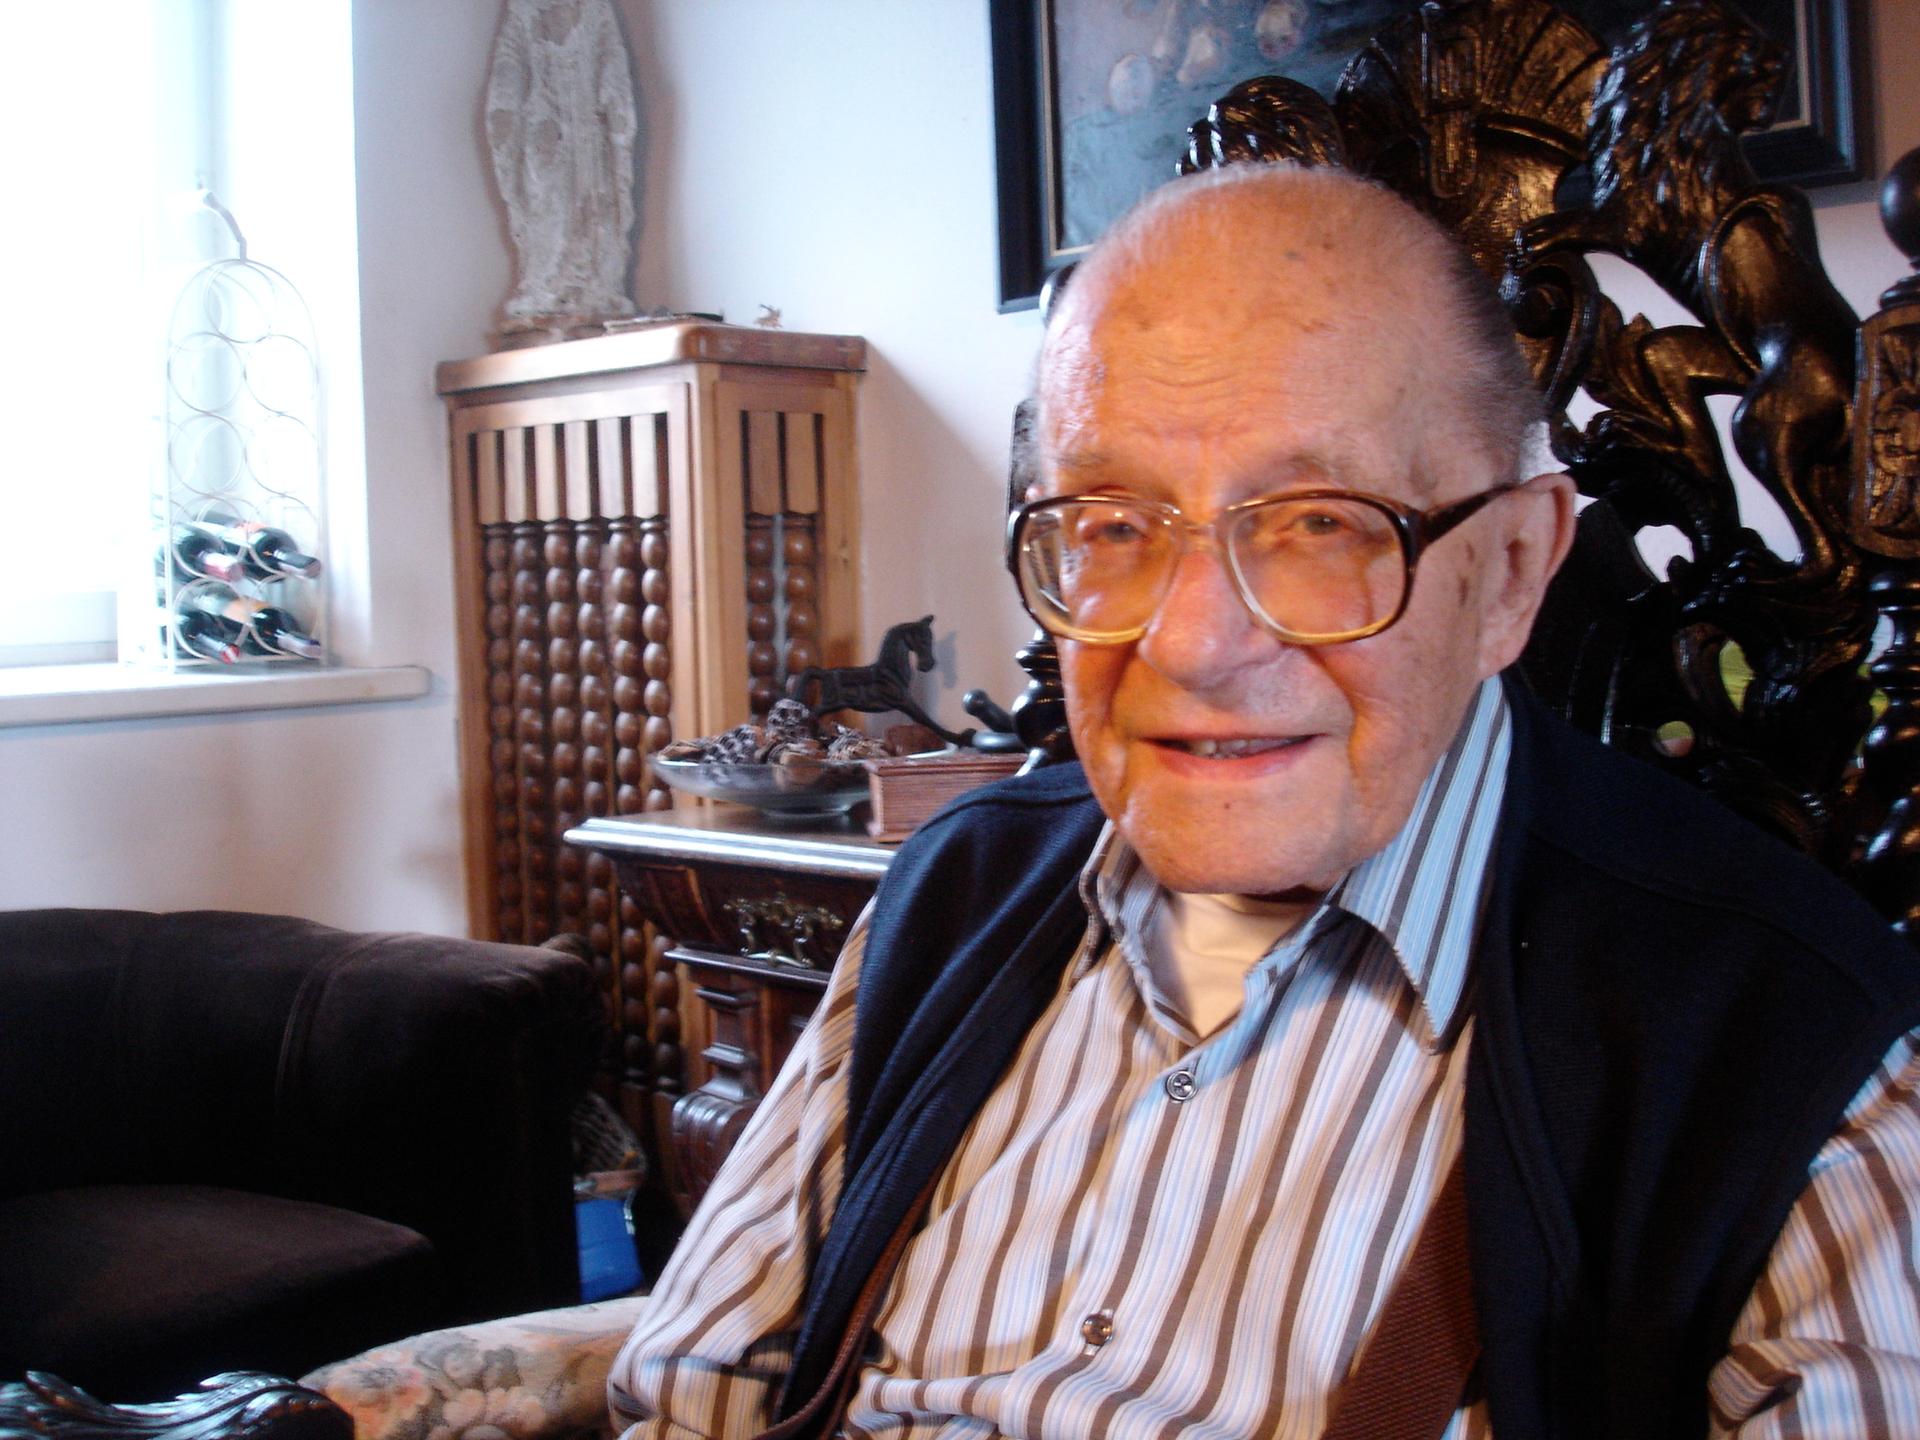 Stefan Baluk (pictured here in 2010) fought for Polish independence in the Warsaw Uprising. He spent much of his time underground, in the sewers. After the war, he was arrested by the Soviets.